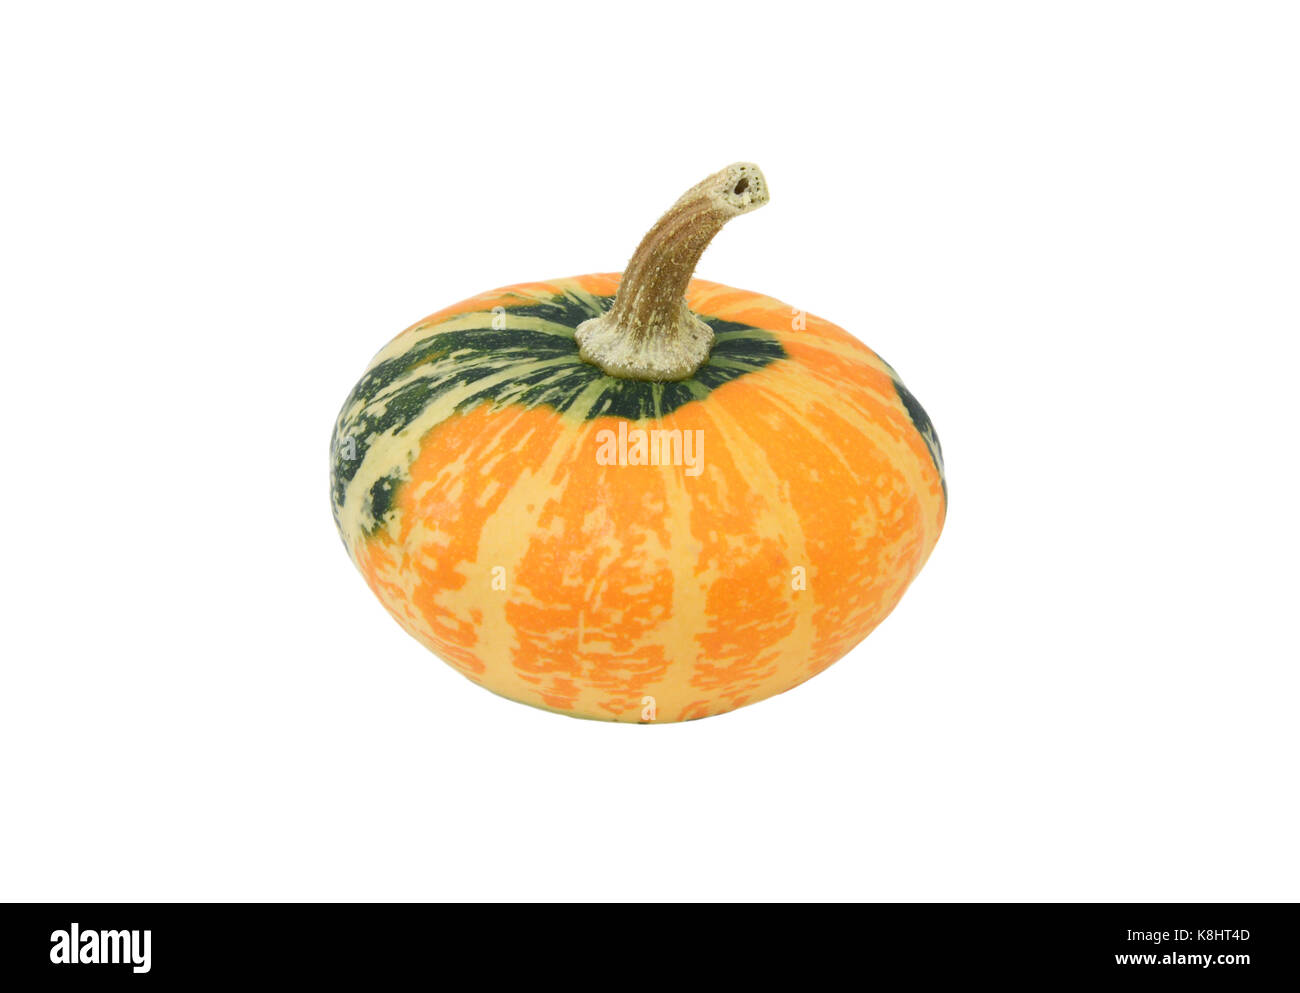 Small disc-shaped ornamental gourd with green and orange markings, isolated on a white background Stock Photo